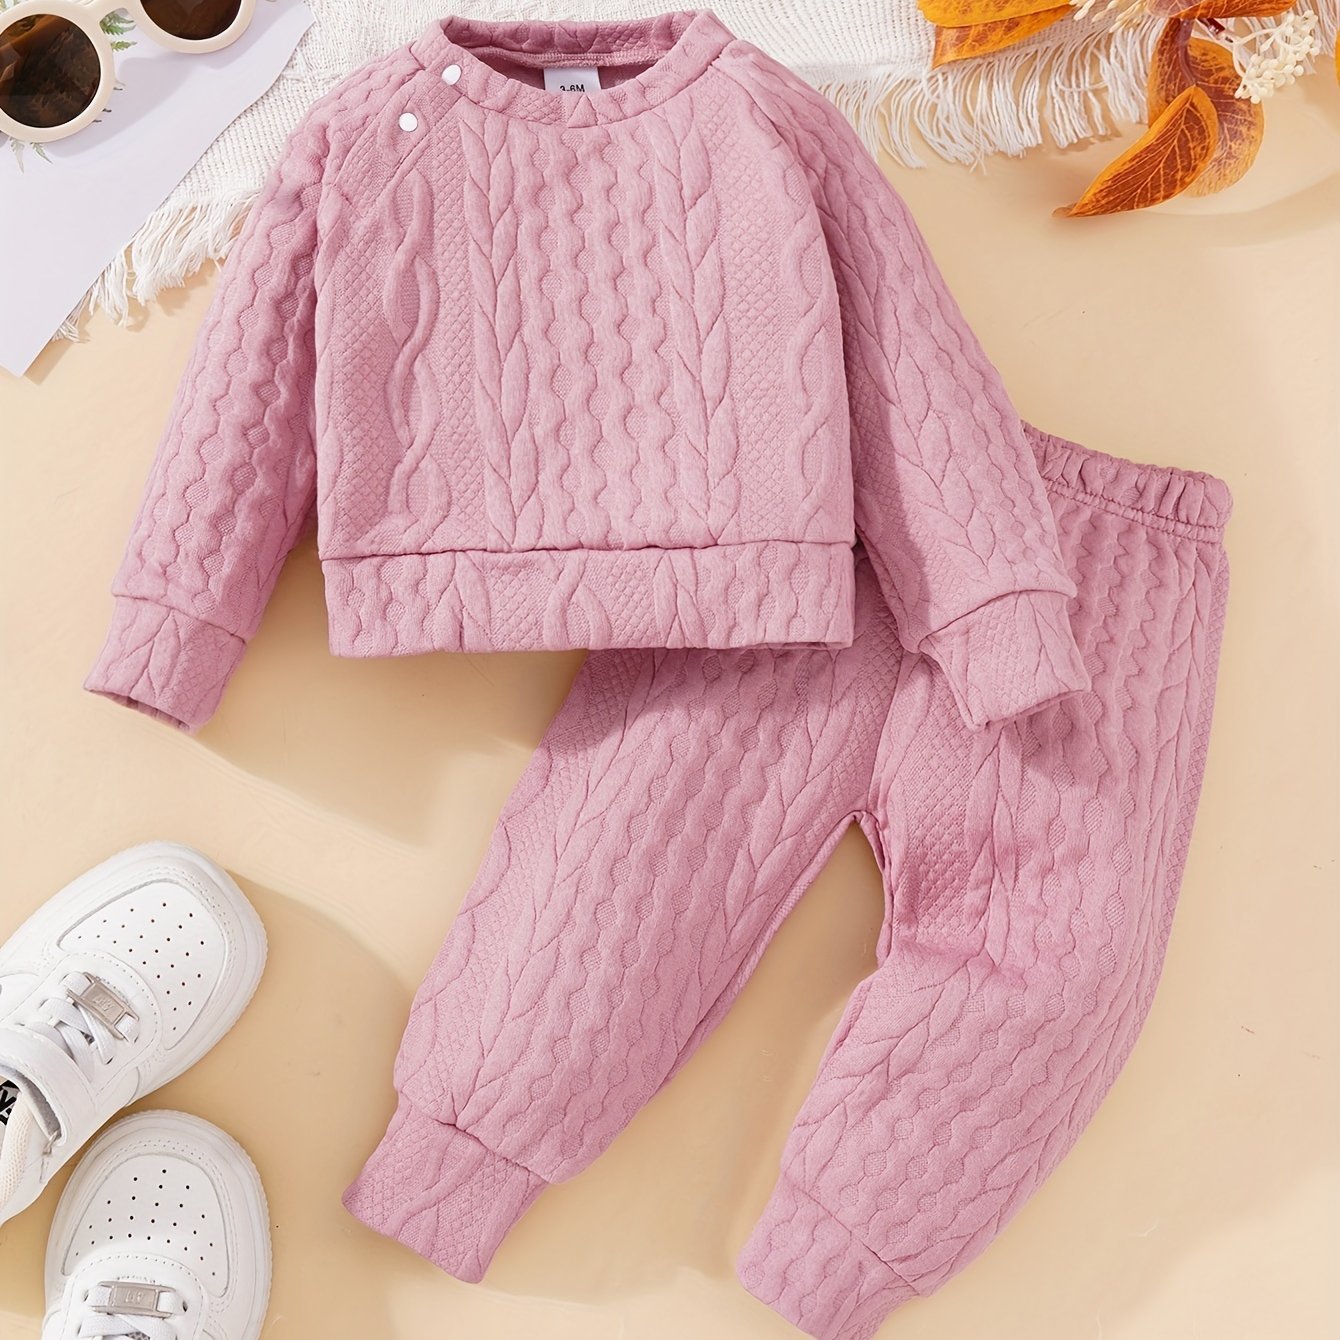 Unisex Baby Girls Boys Cable Knit Sweater Long Sleeve T - Shirt Tops + Pants 2pcs Outfit Fall Winter Warm Clothes - Ammpoure Wellbeing